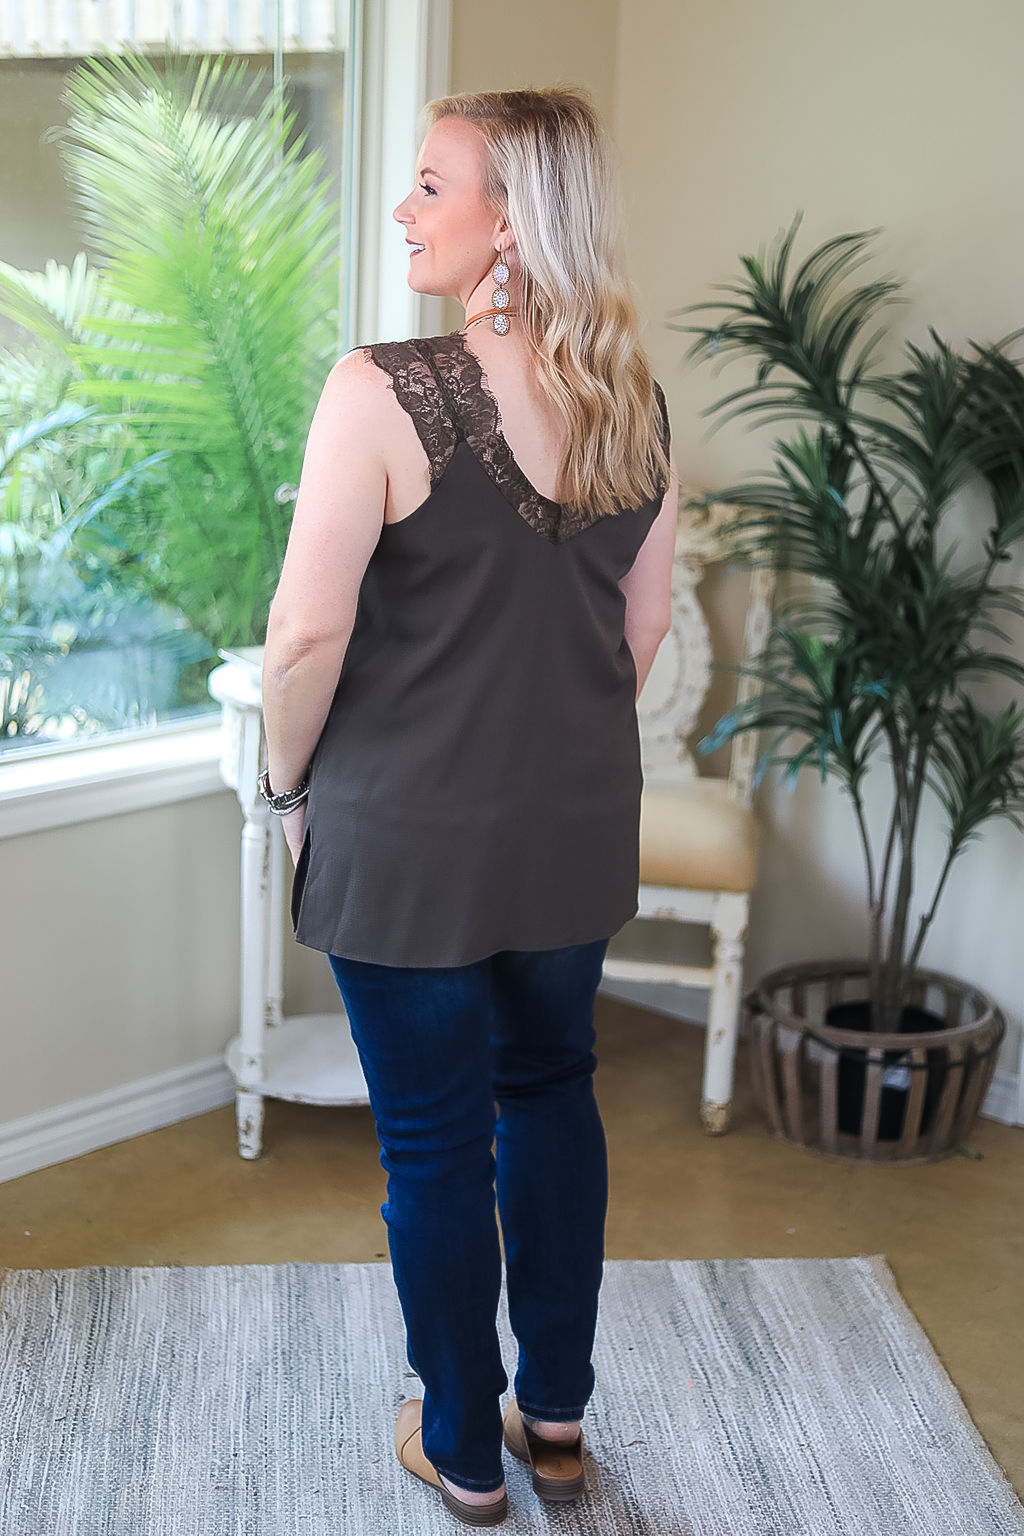 On Replay Solid Color Camisole with Lace Sleeves in Olive Green - Giddy Up Glamour Boutique